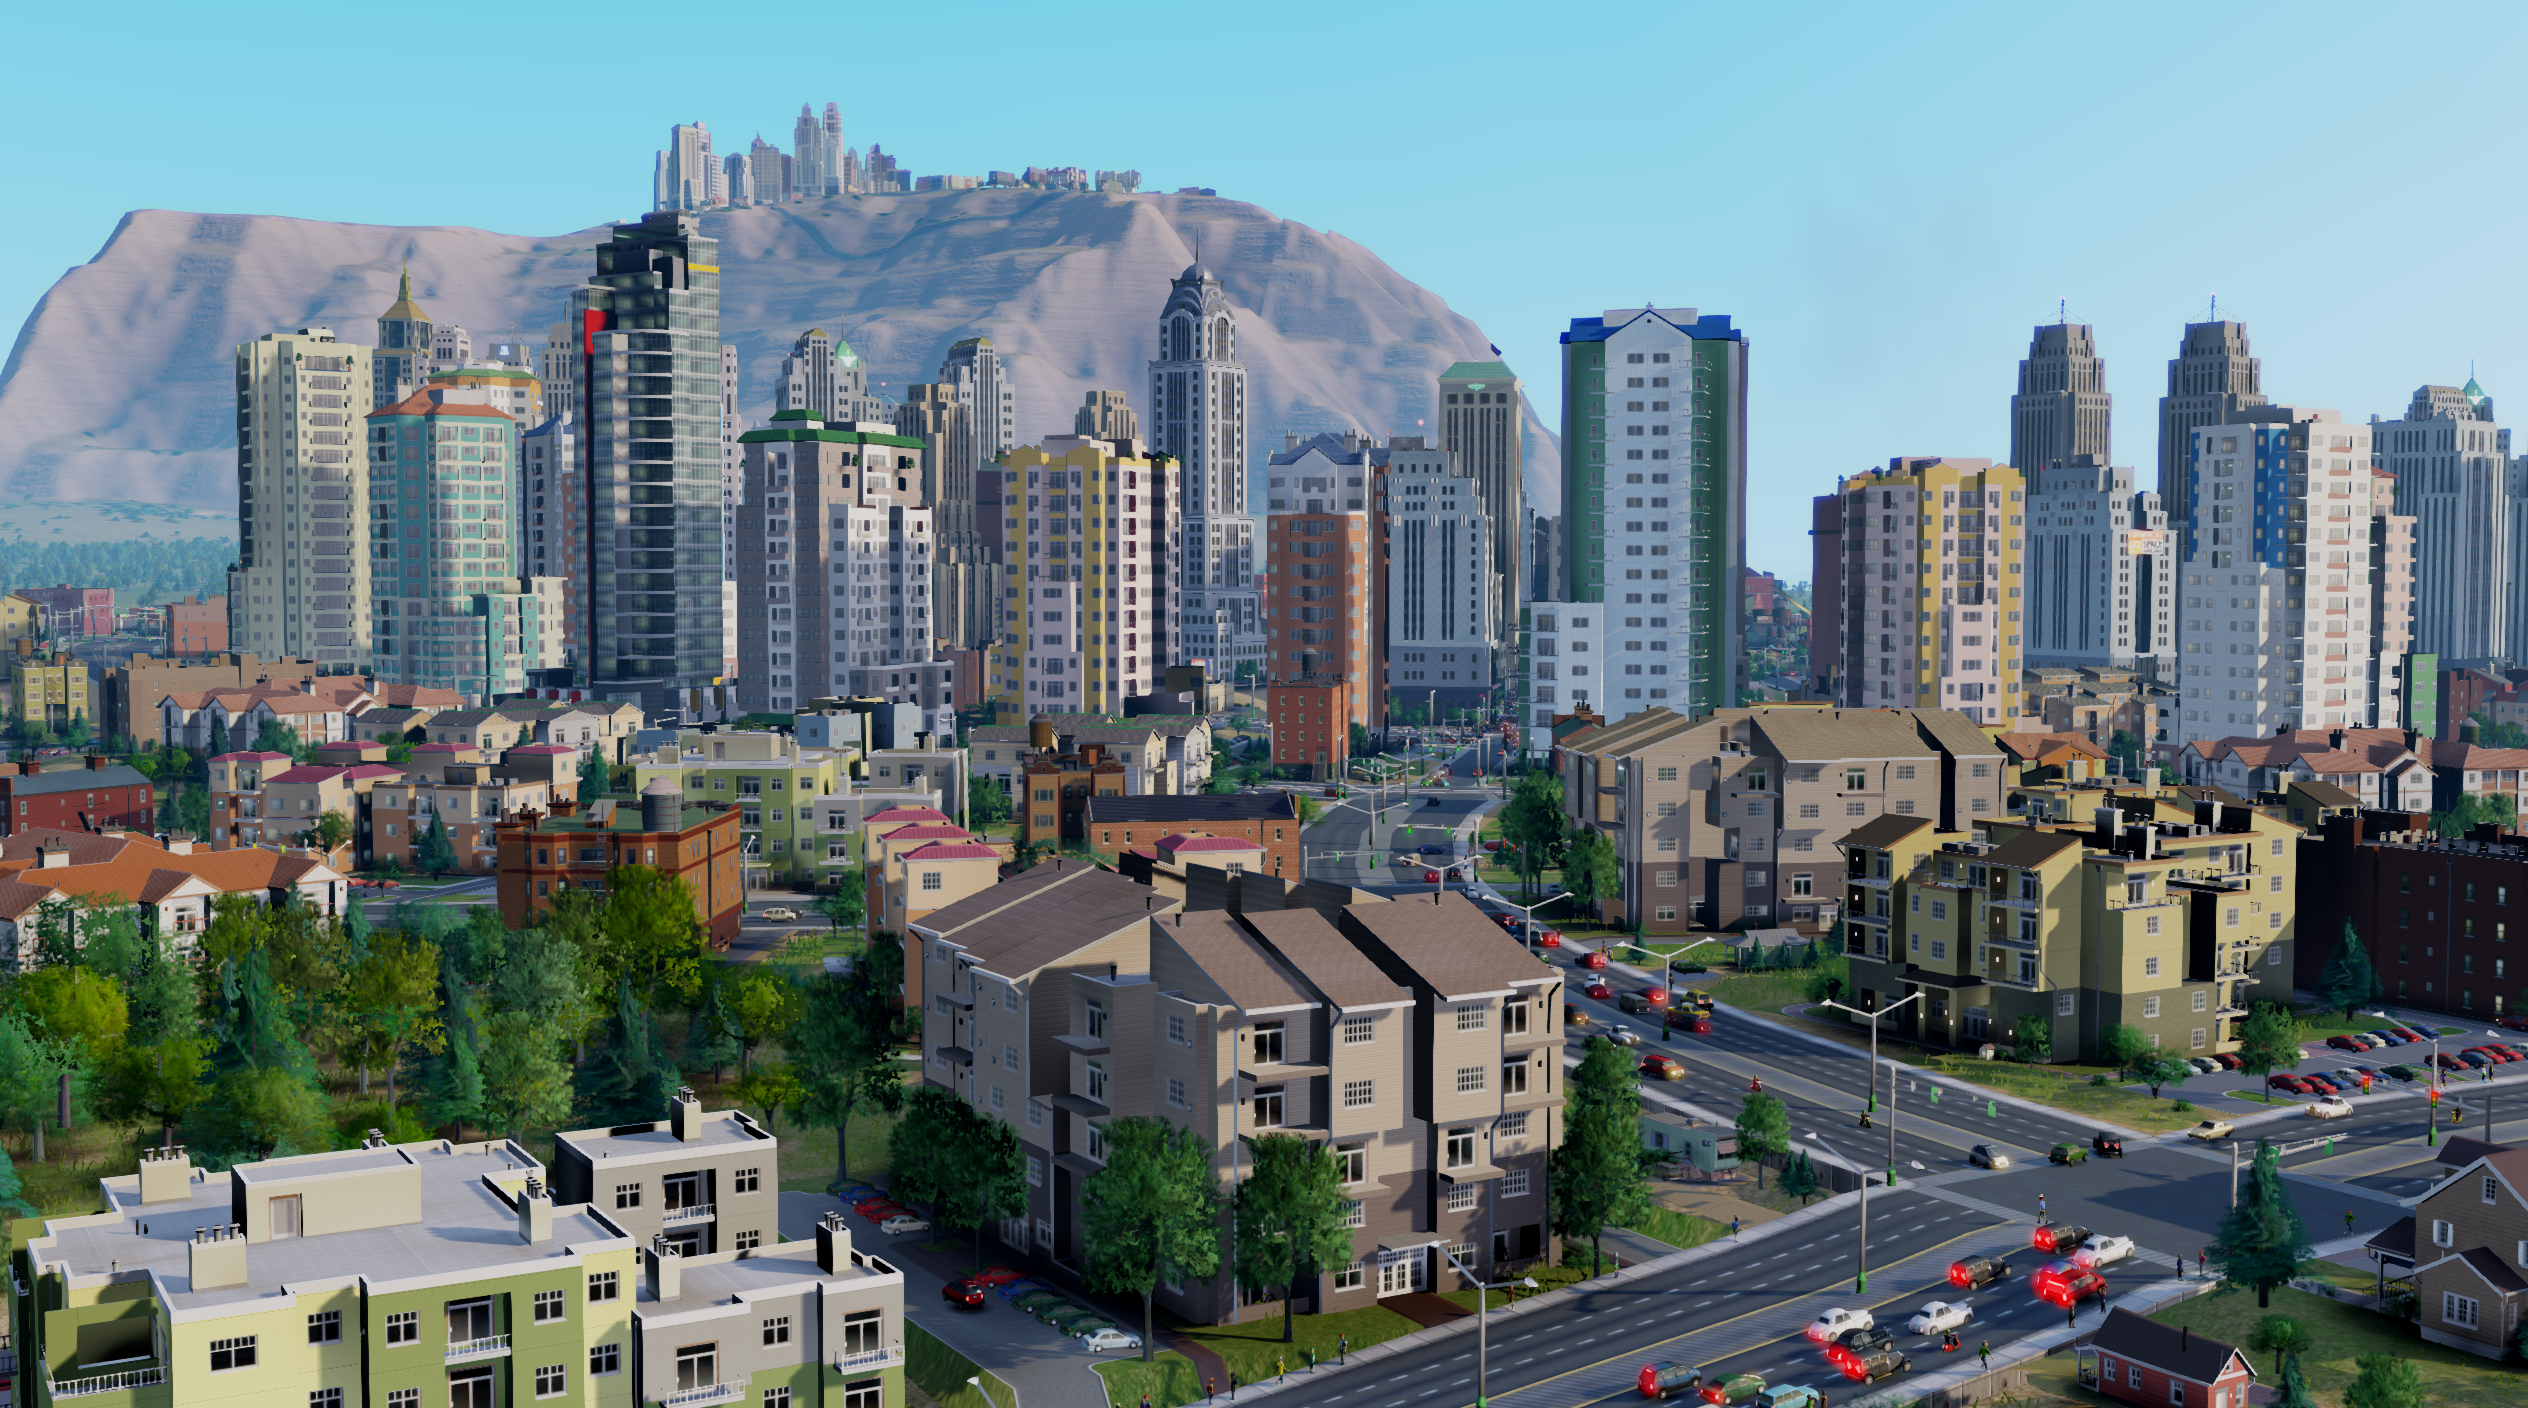 Simcity: What it’s like to play in the 16 City Region “Viridian Woods”